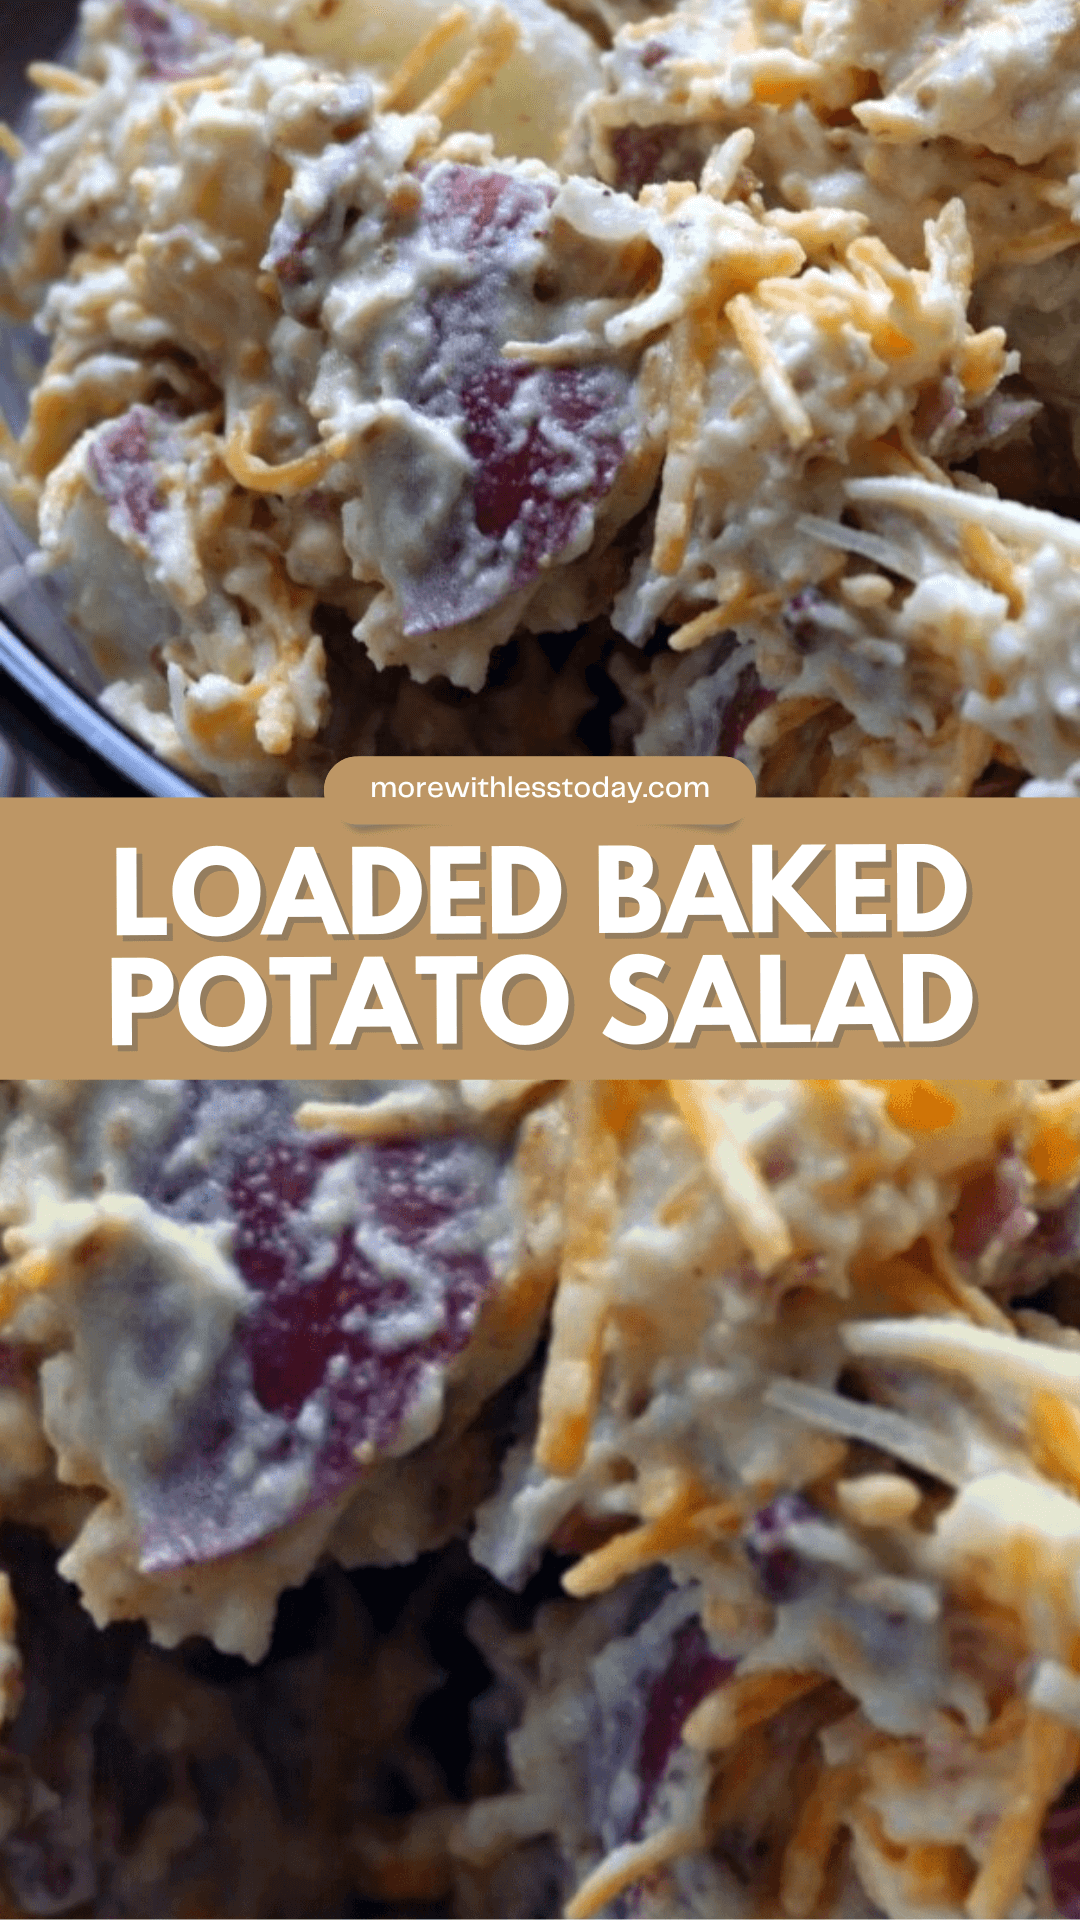 PIN for How To Make Loaded Baked Potato Salad